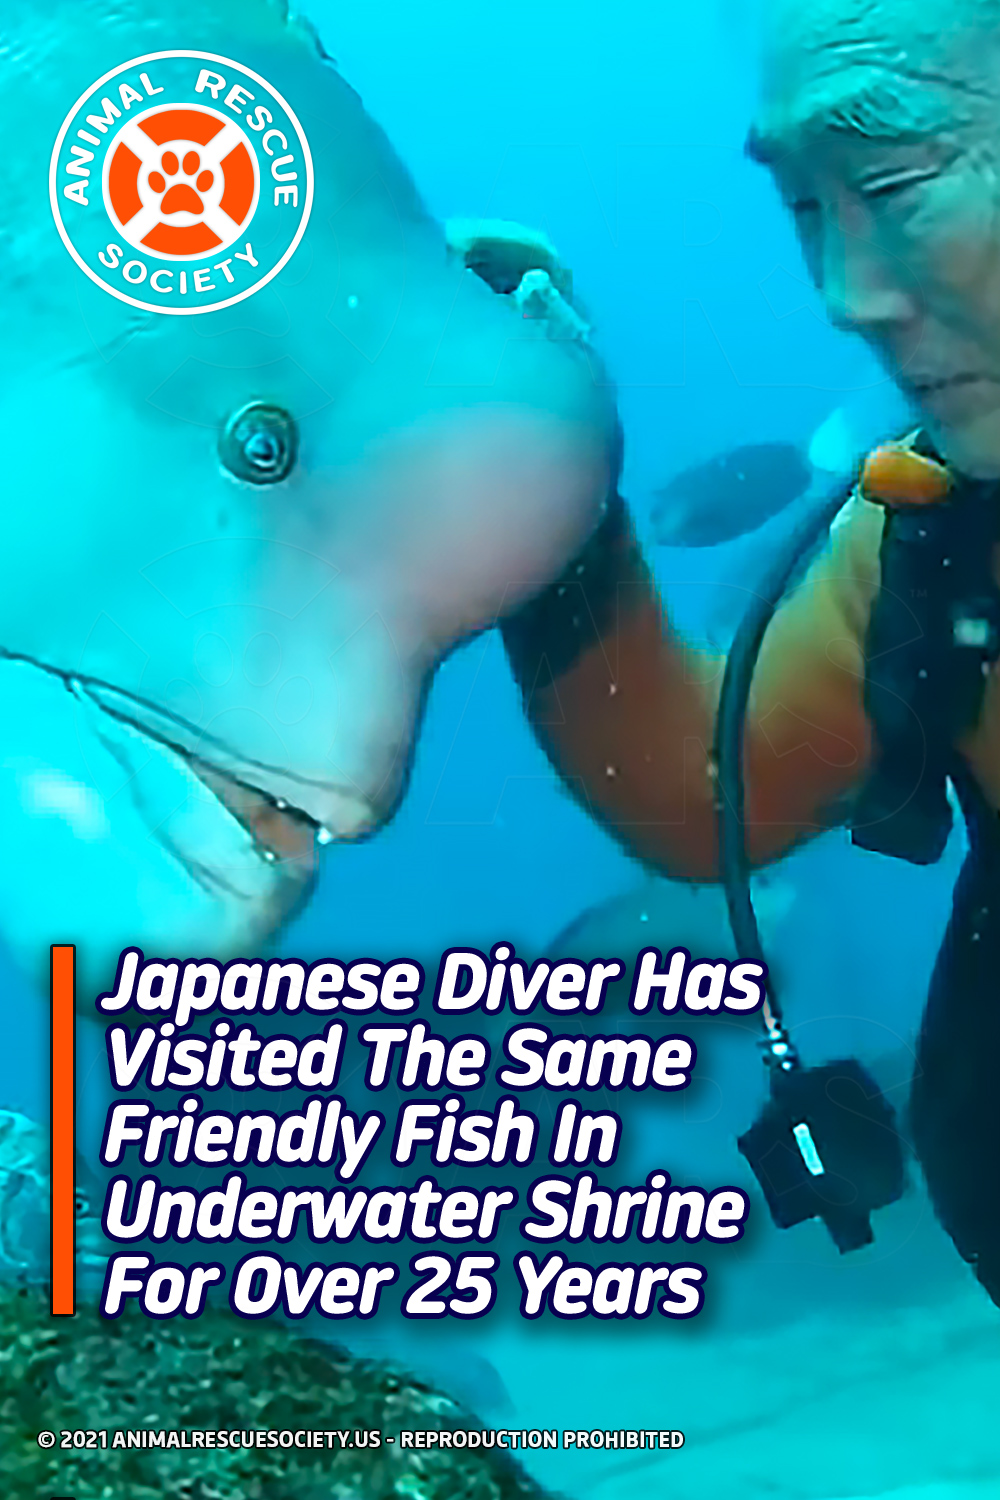 Japanese Diver Has Visited The Same Friendly Fish In Underwater Shrine For Over 25 Years